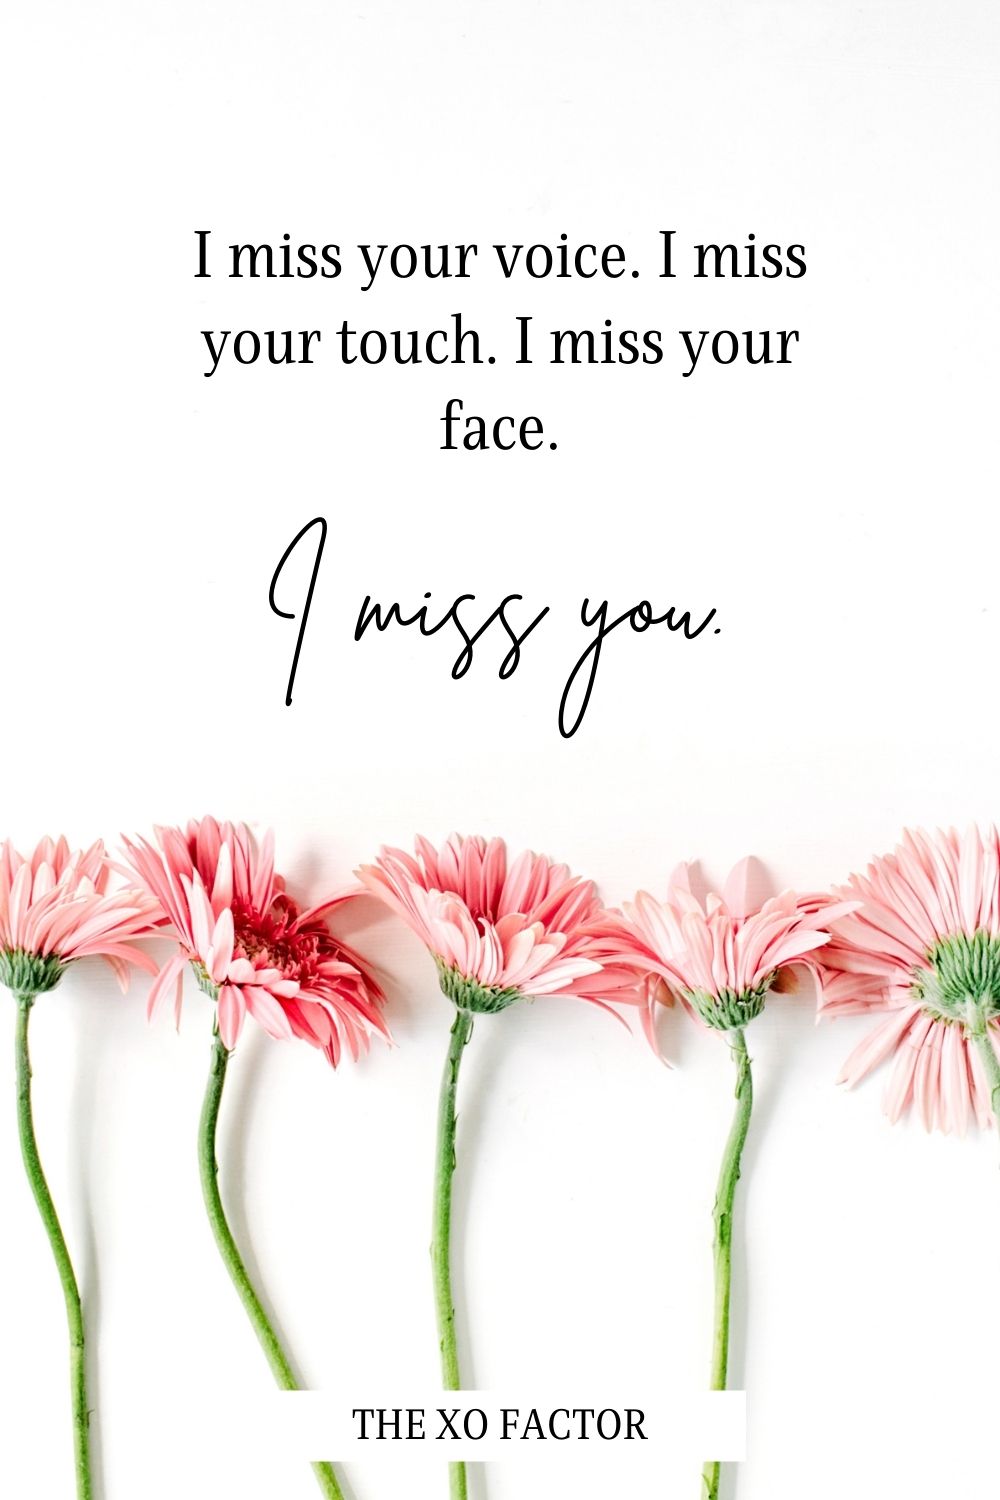 I miss your voice. I miss your touch. I miss your face. I miss you.